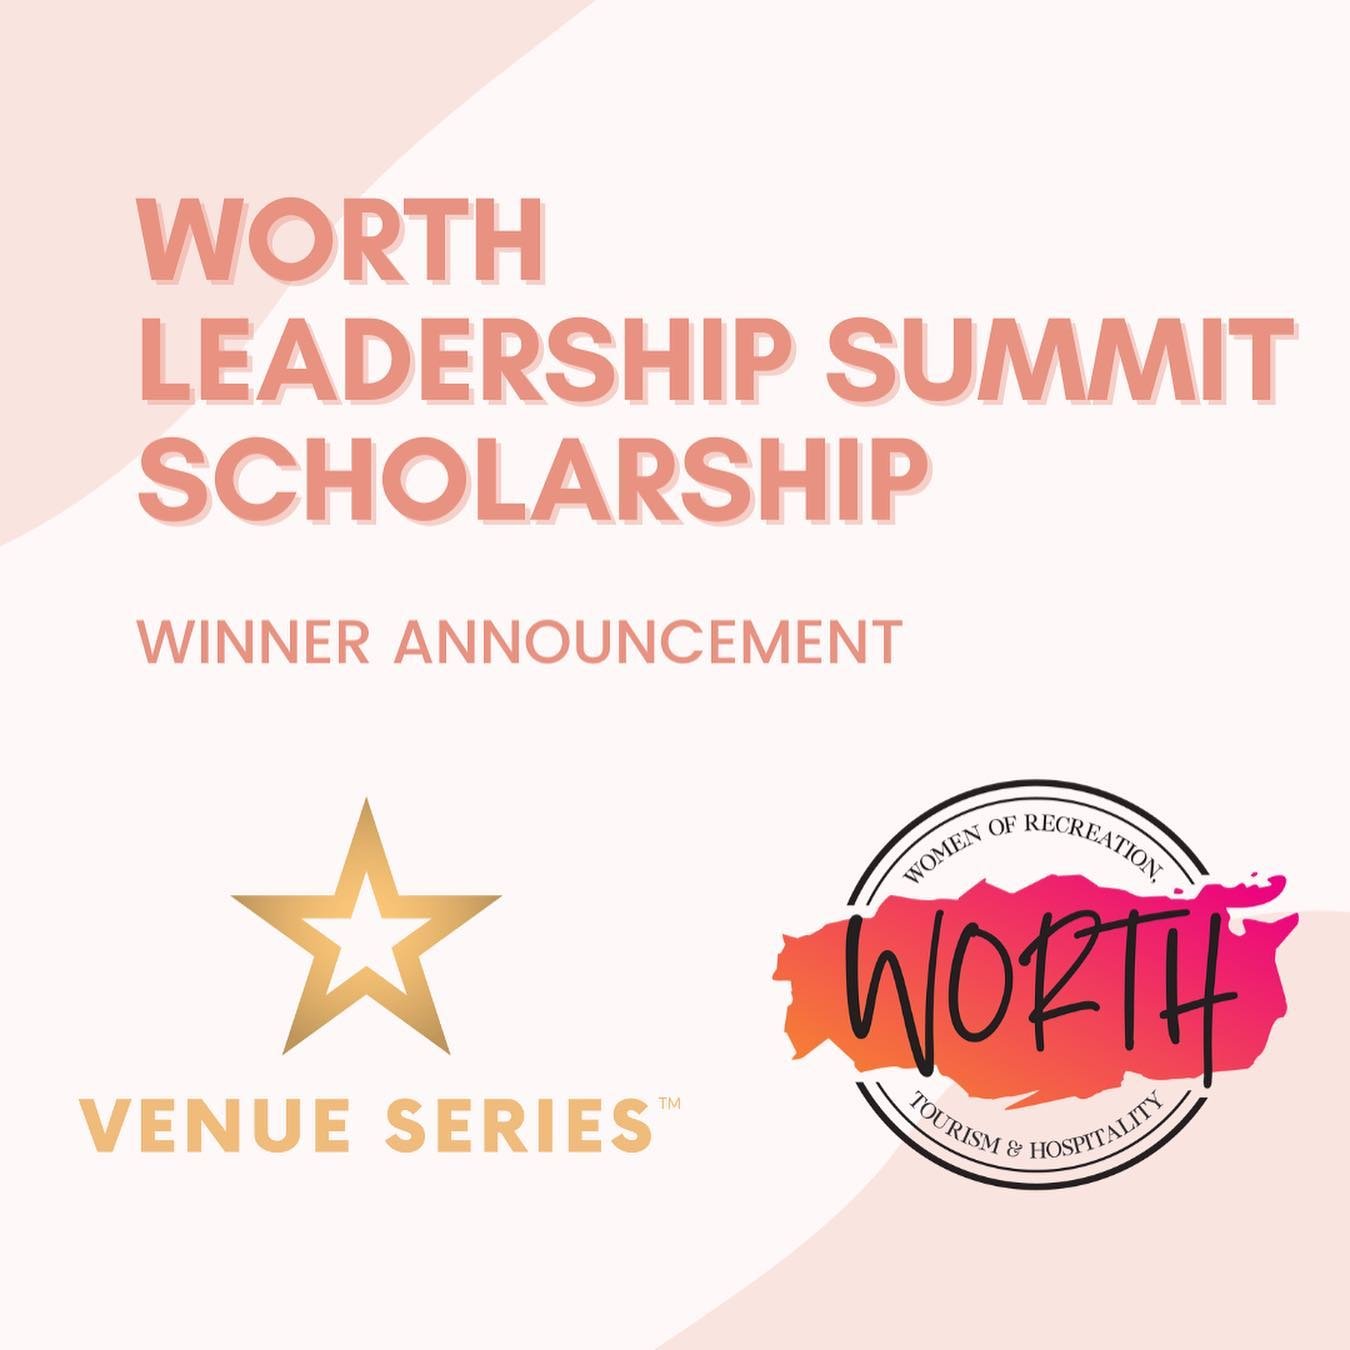 🌟 Winners Announcement! 🌟 We&rsquo;re overjoyed to congratulate the recipients of the WORTH Summit scholarships, made possible by our amazing partner, @thevenueseries! 

Representing the future of women in recreation, tourism, and hospitality, thes